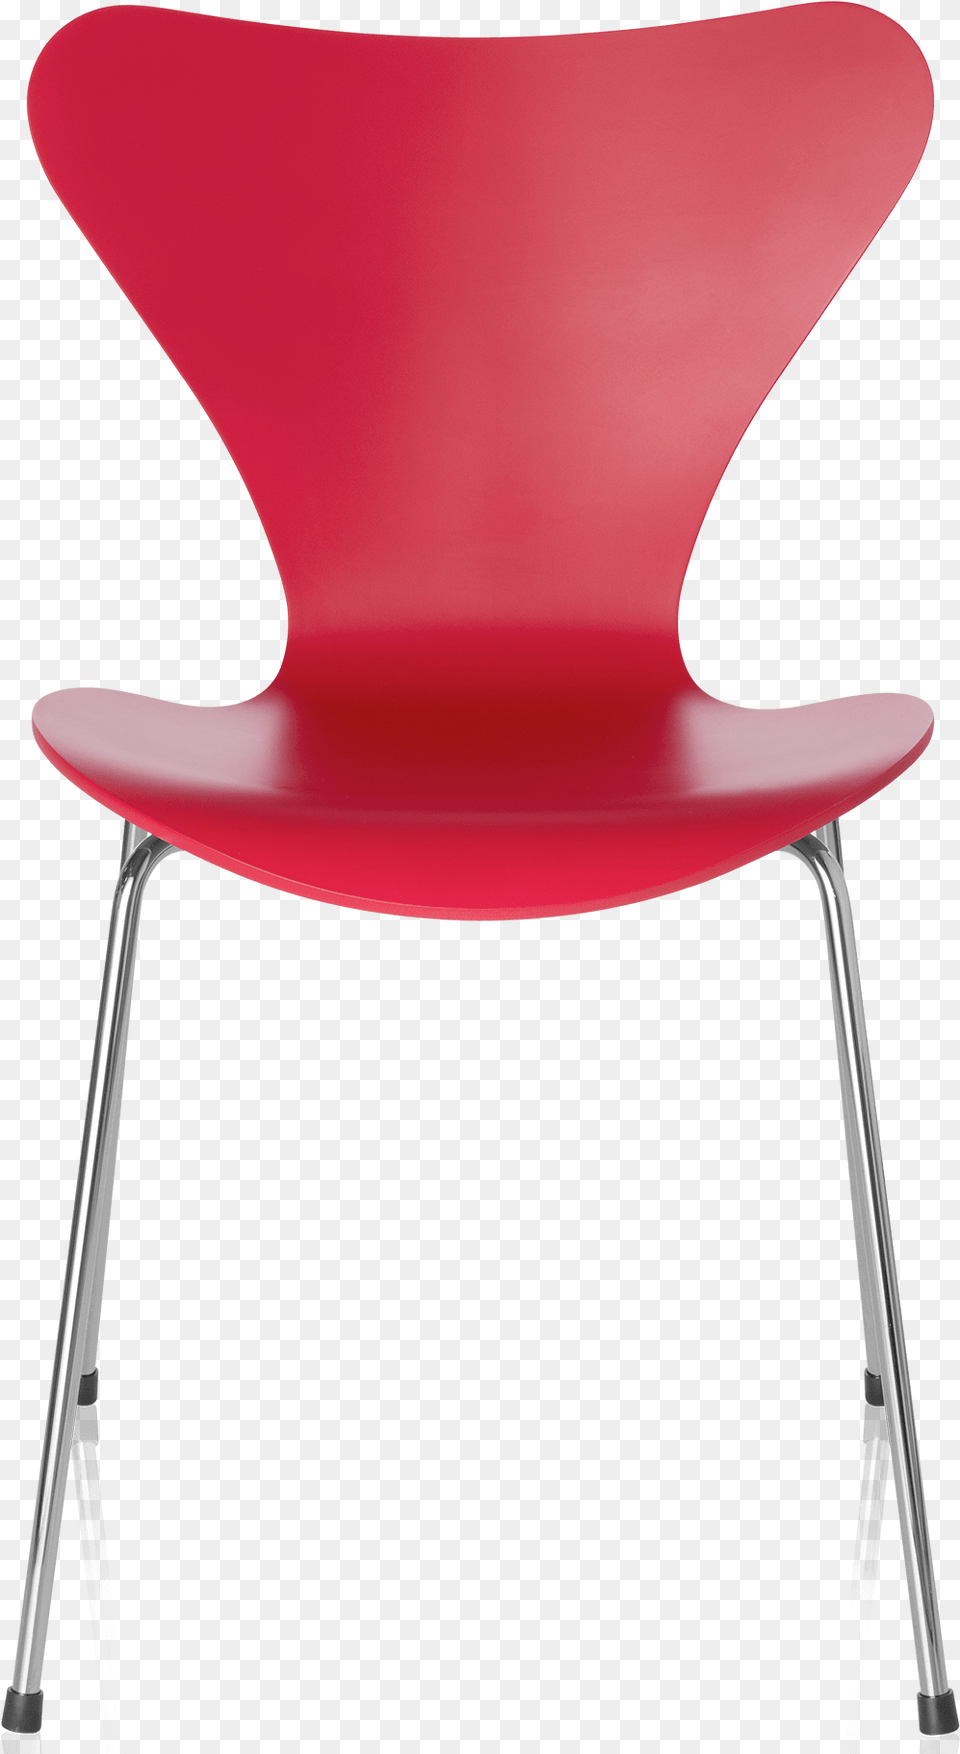 Series 7 Chair Arne Jacobsen Opium Red Lacquered, Furniture Free Png Download